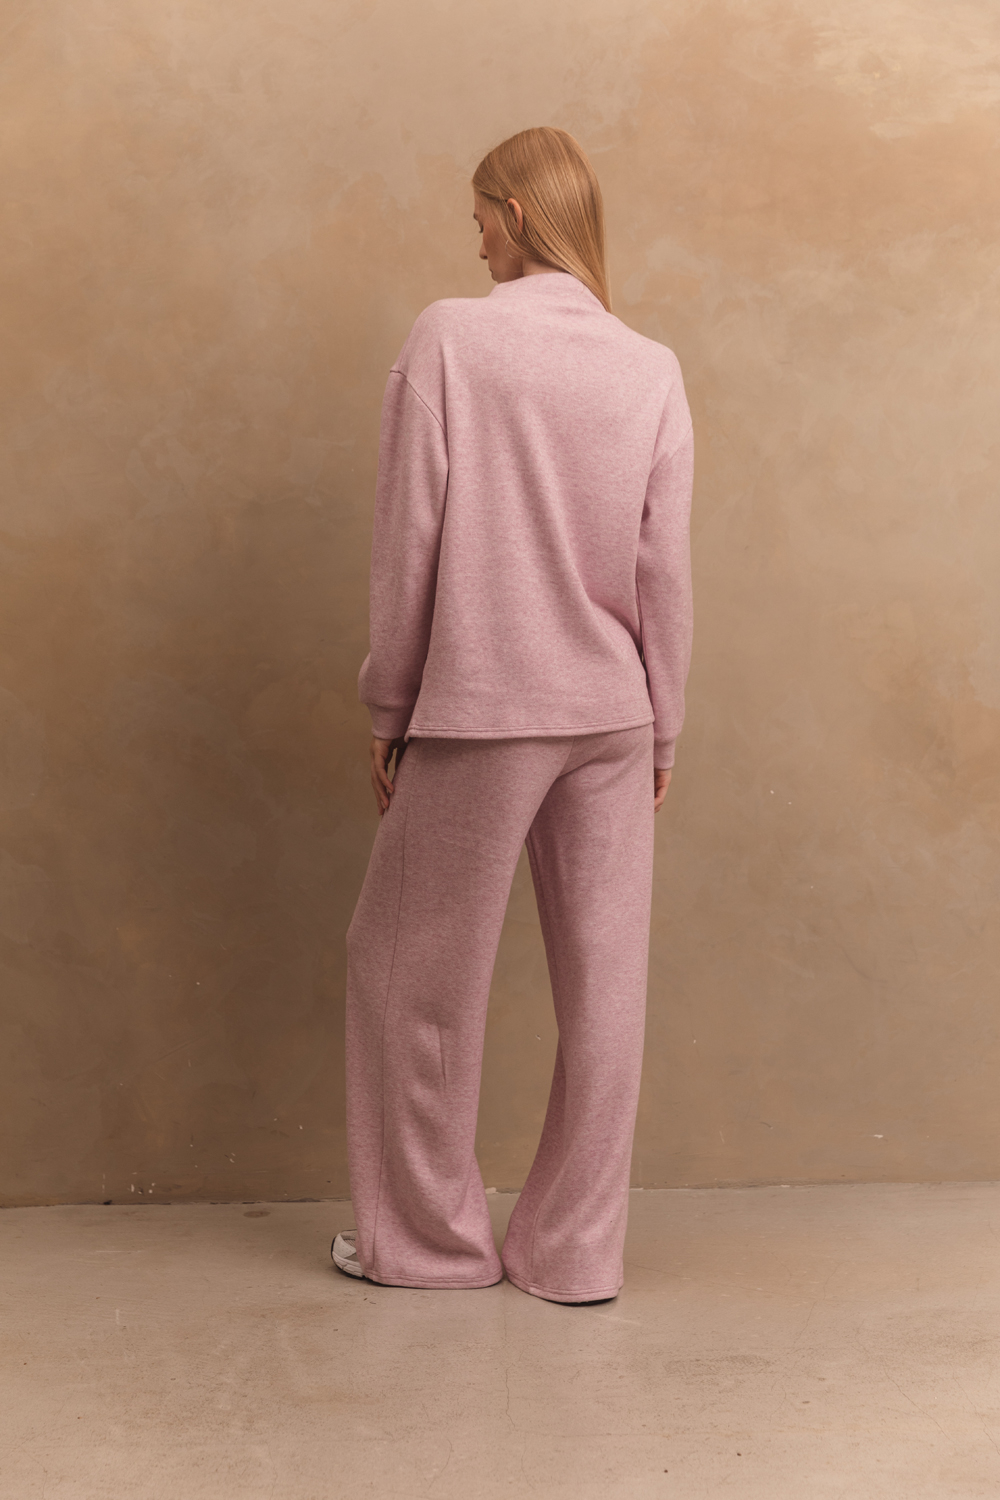 Angora pantsuit in color 